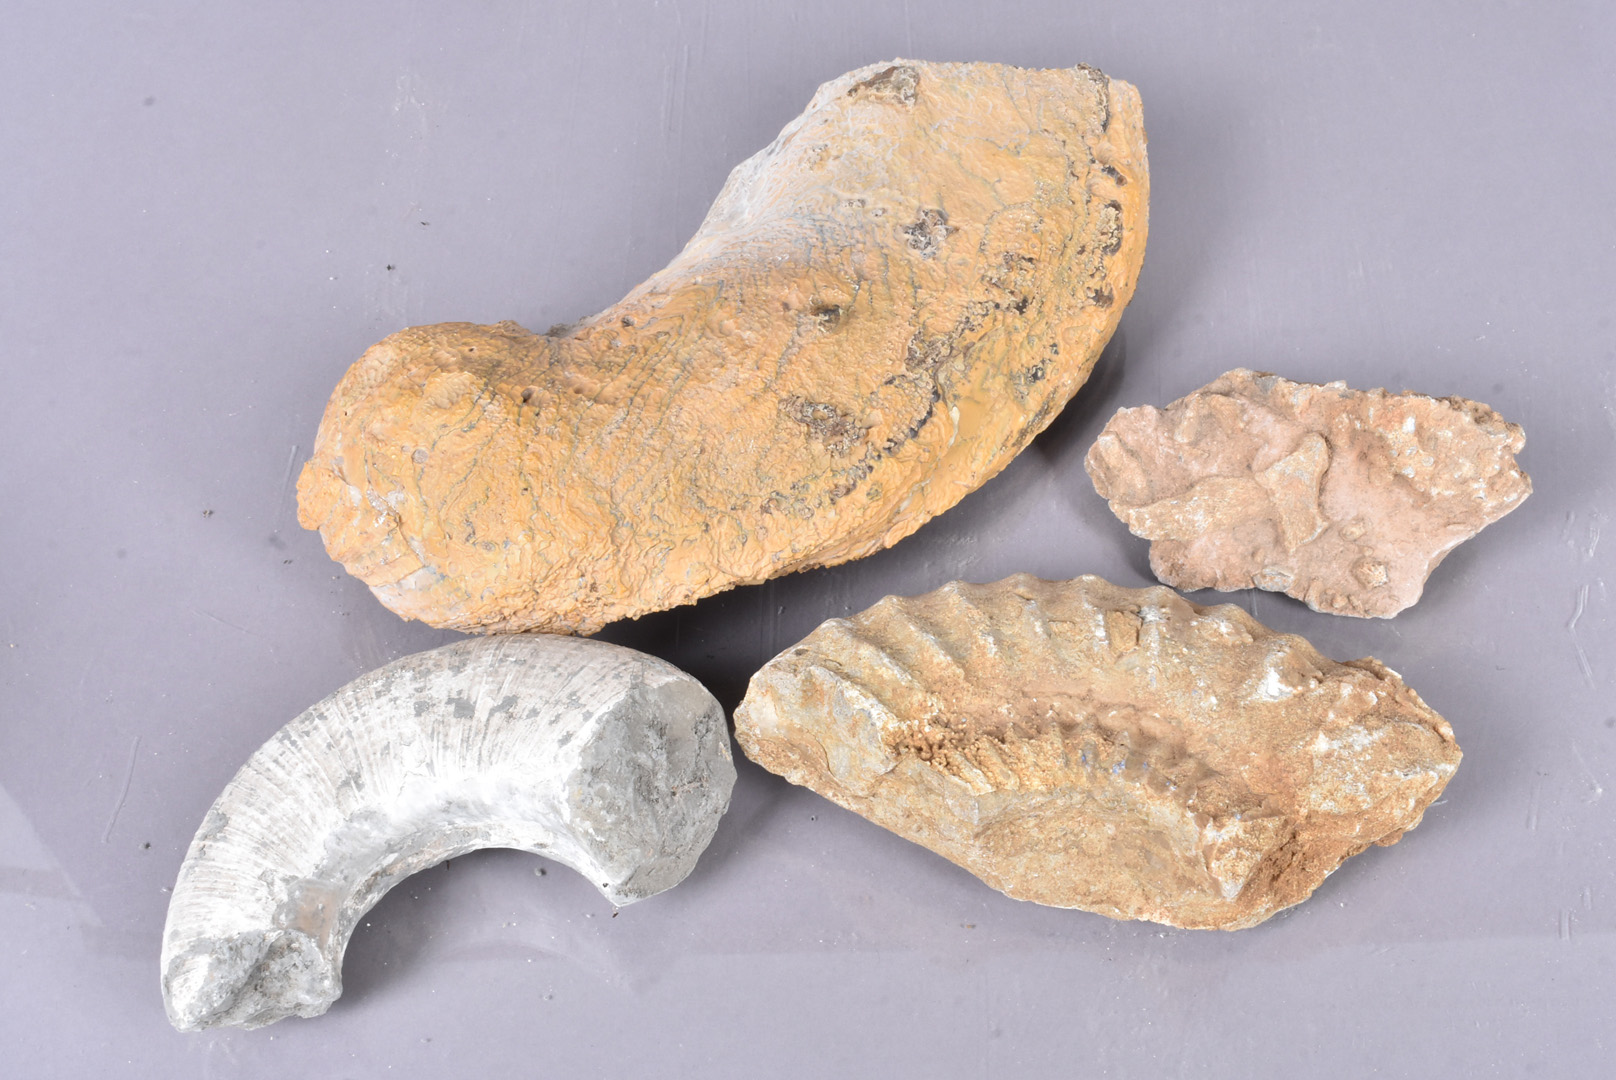 A large fossilised Oyster, discovered in Libya, together with two pieces of ammonite, both of